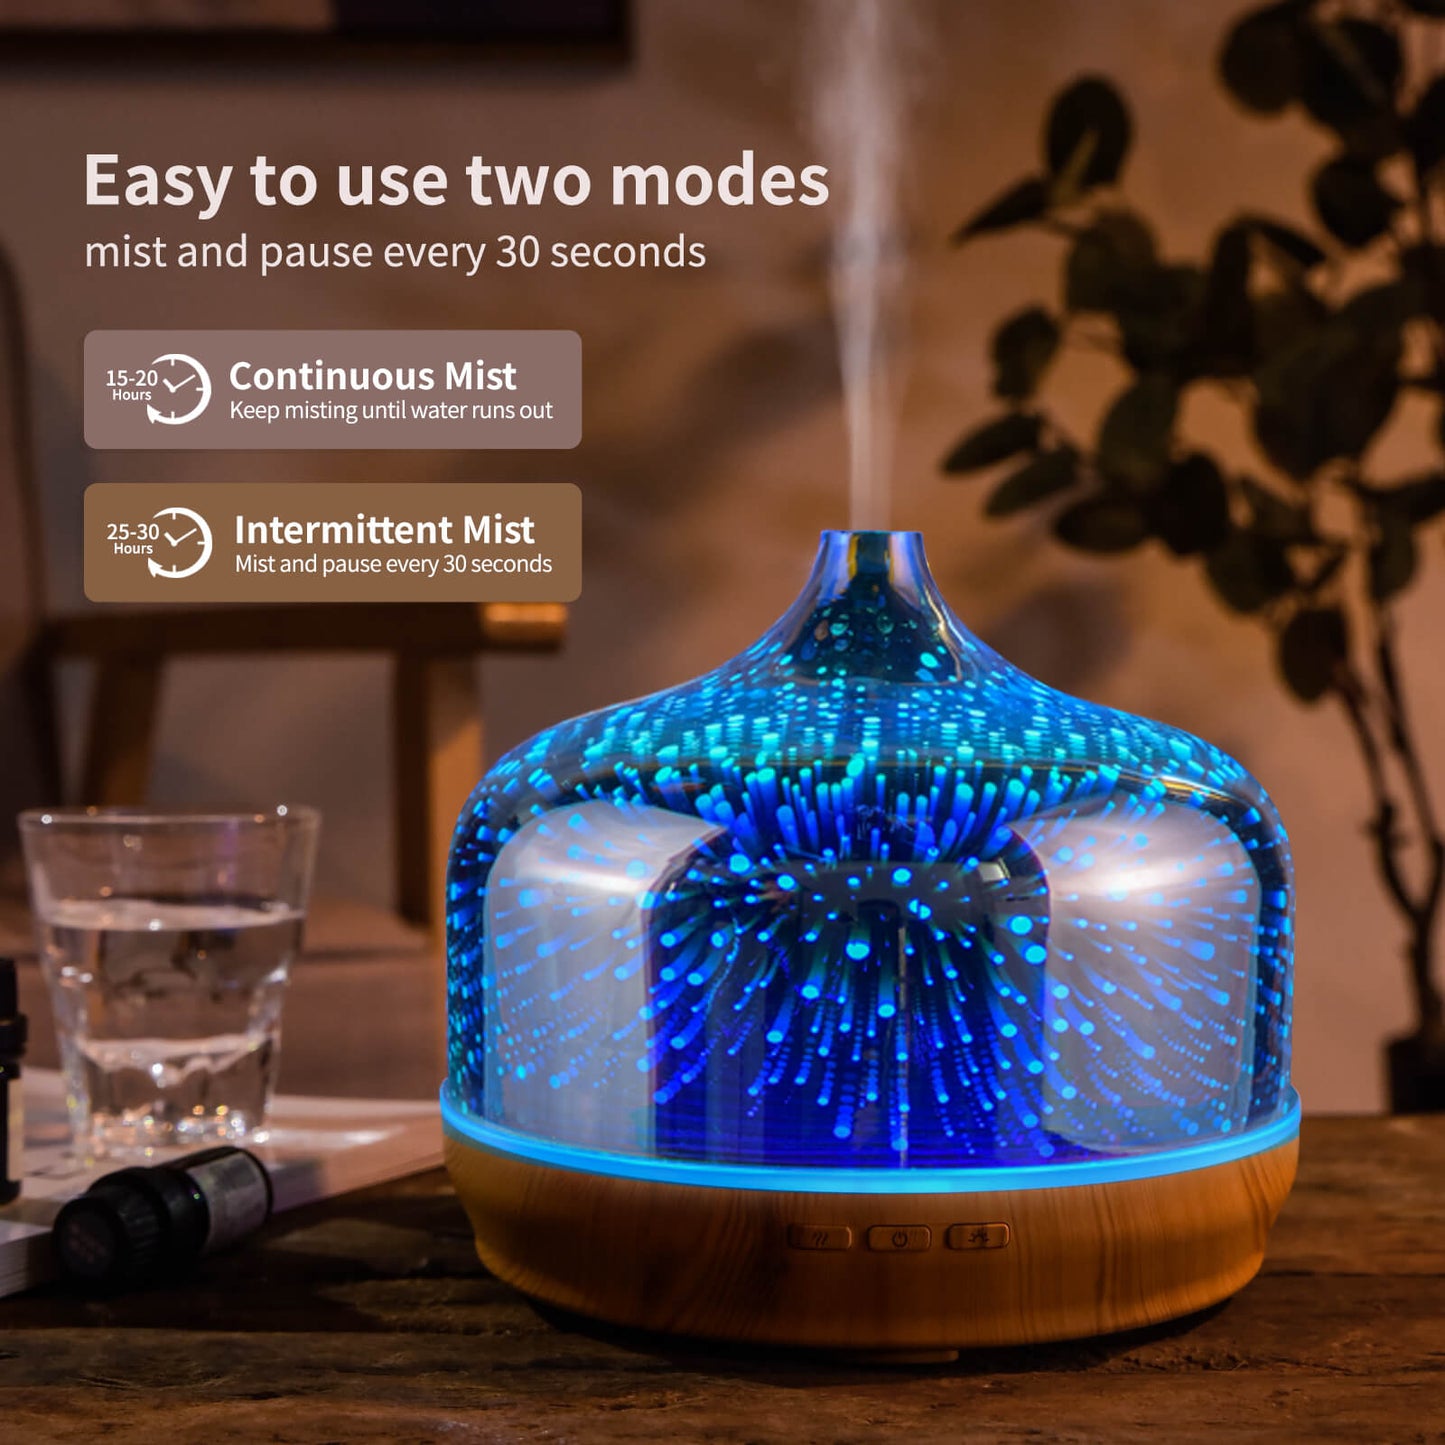 500ml Essential Oil Diffuser 3D Glass Aromatherapy Ultrasonic Humidifier - Auto Shut-Off,Timer Setting, BPA Free for Home Hotel Yoga SPA Gift